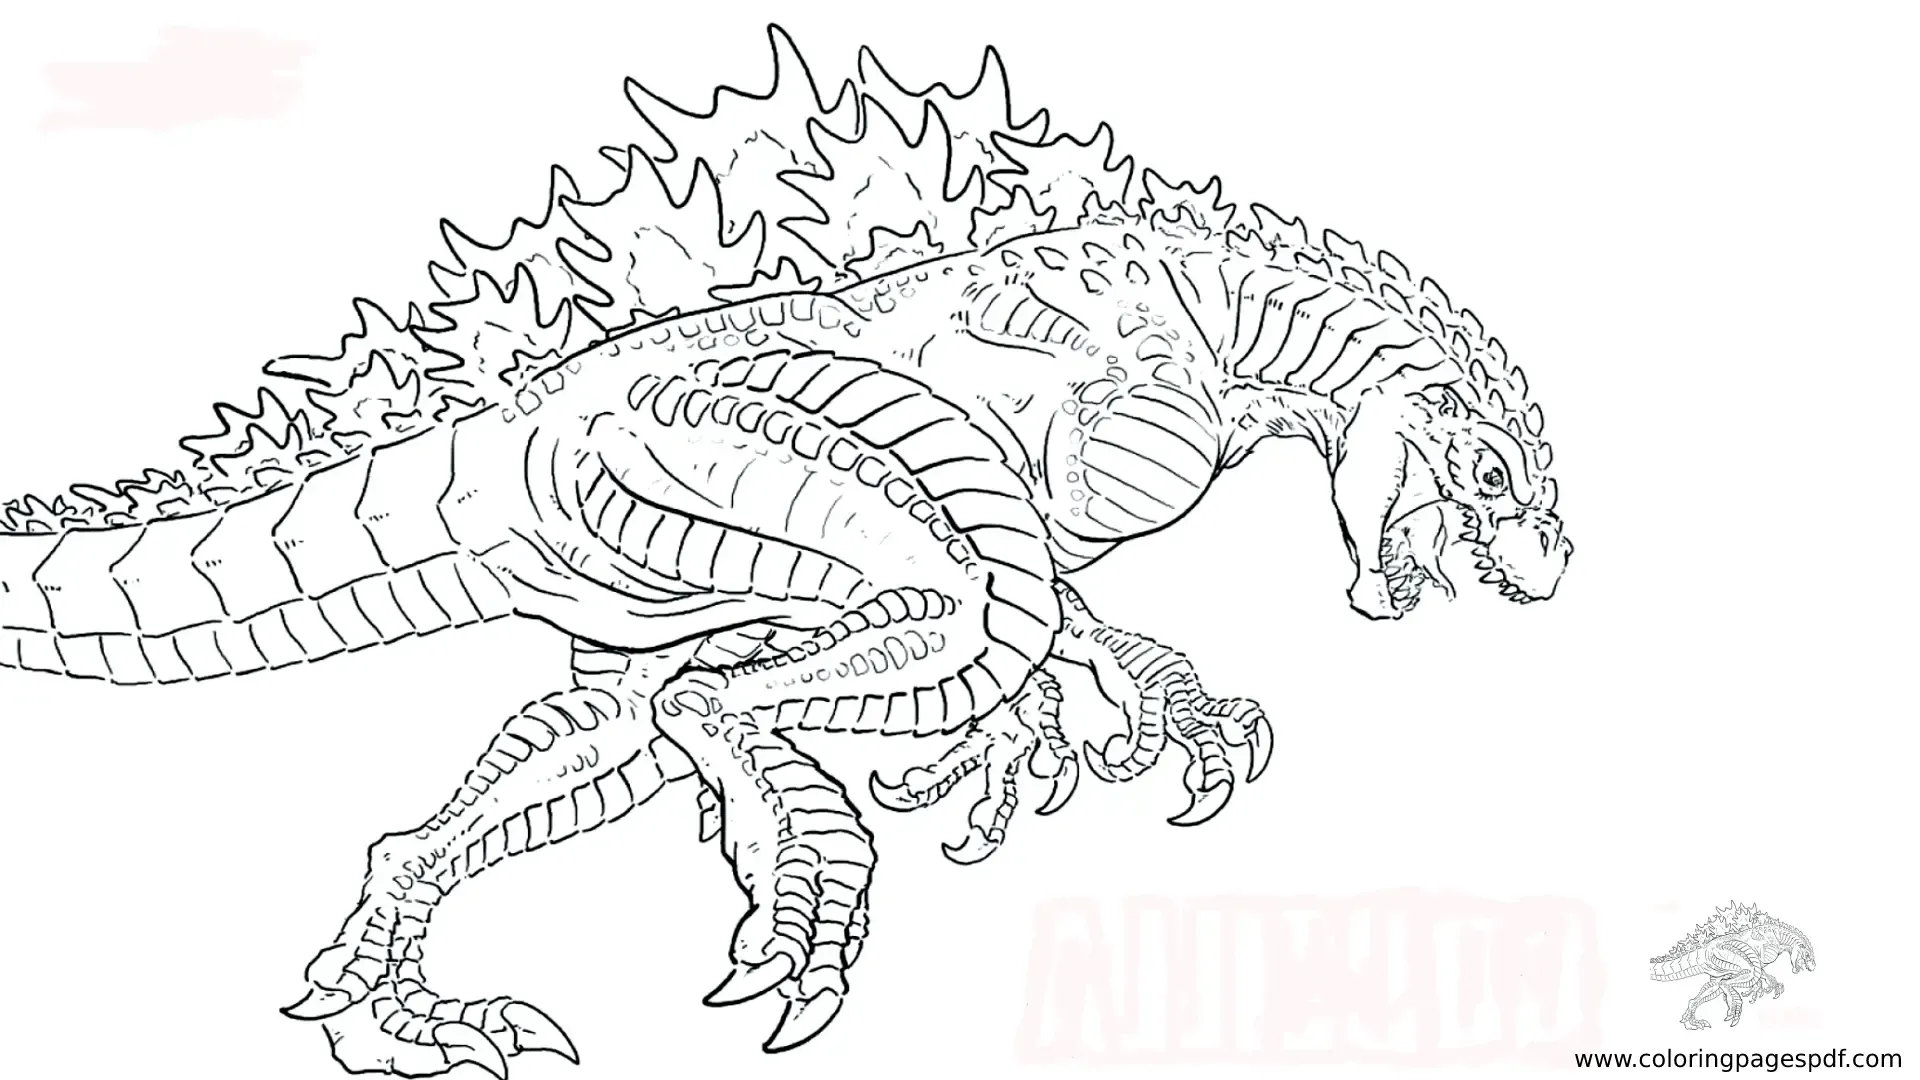 Coloring Pages Of Godzilla Running